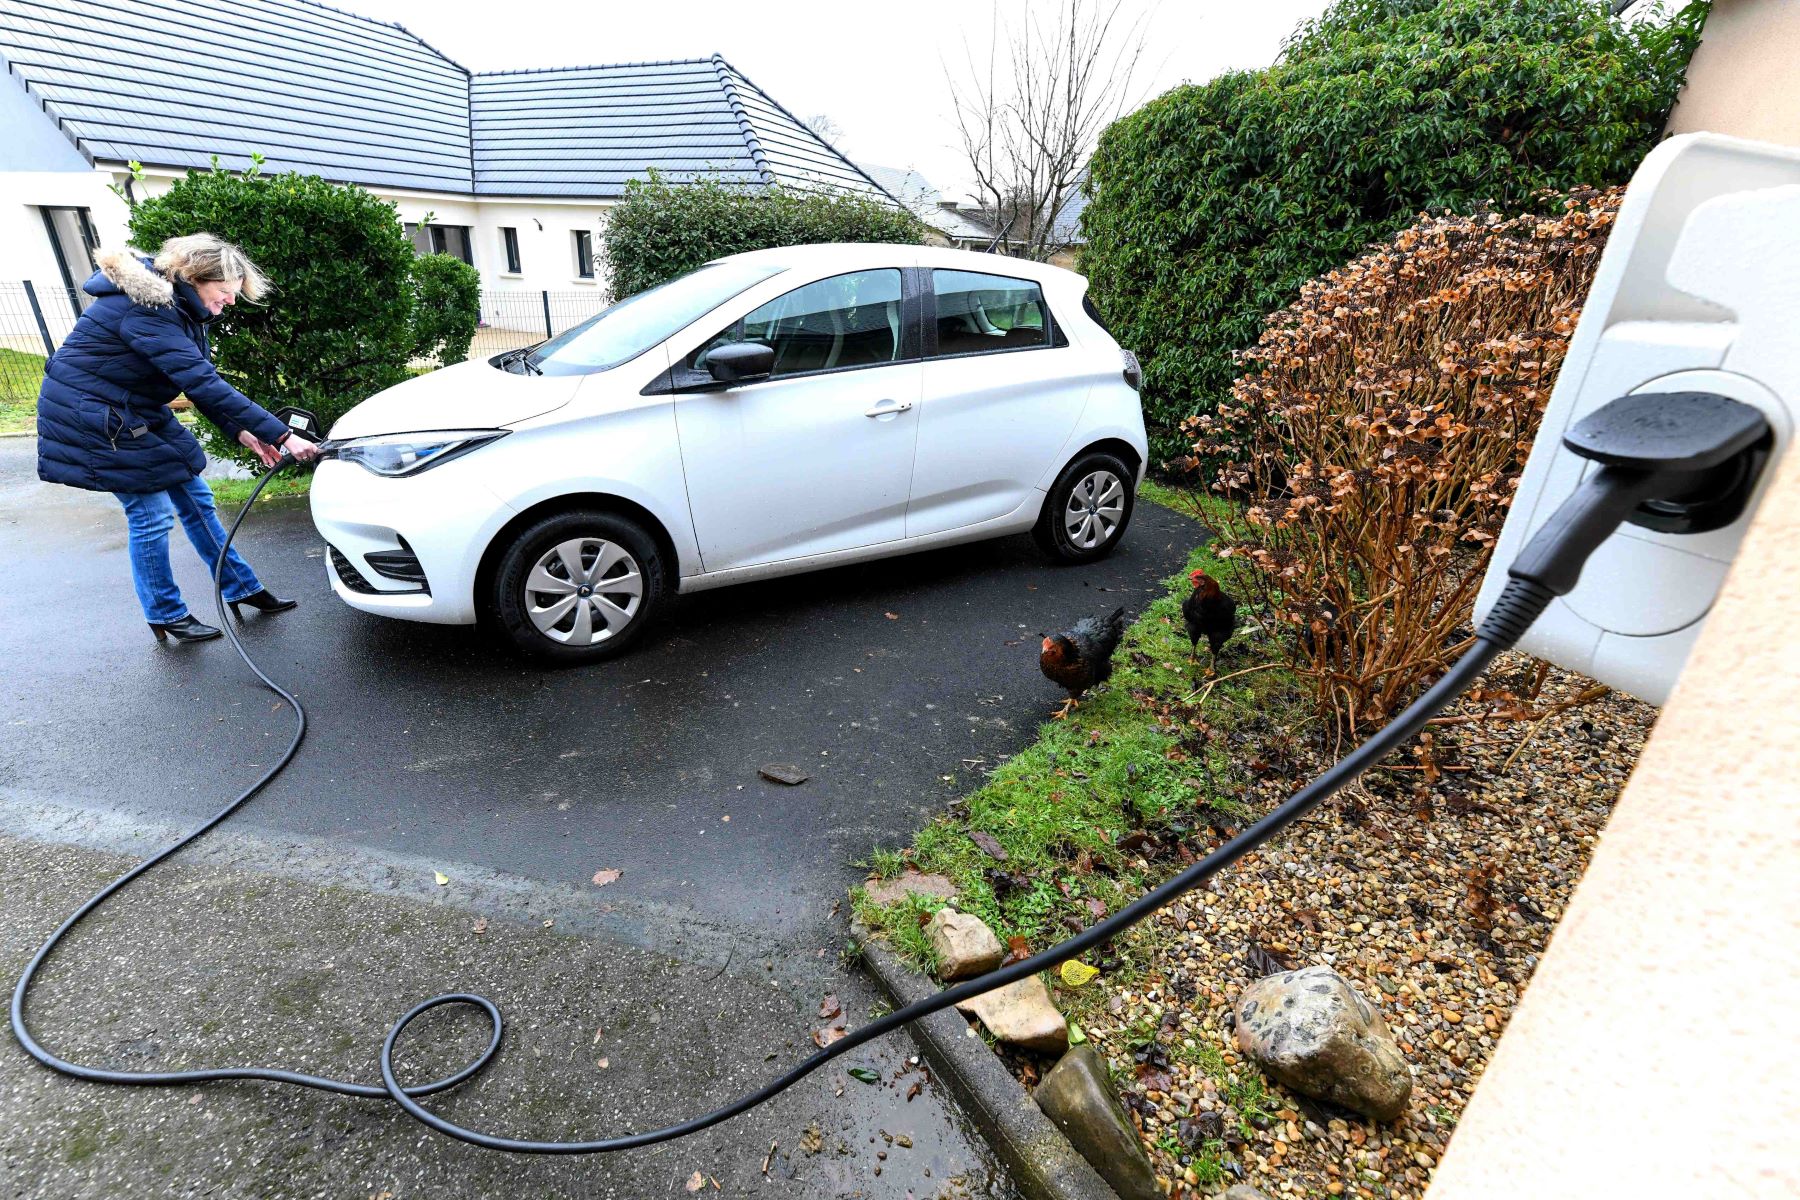 A Renault electric car charging at home using a Level 1 standard outlet